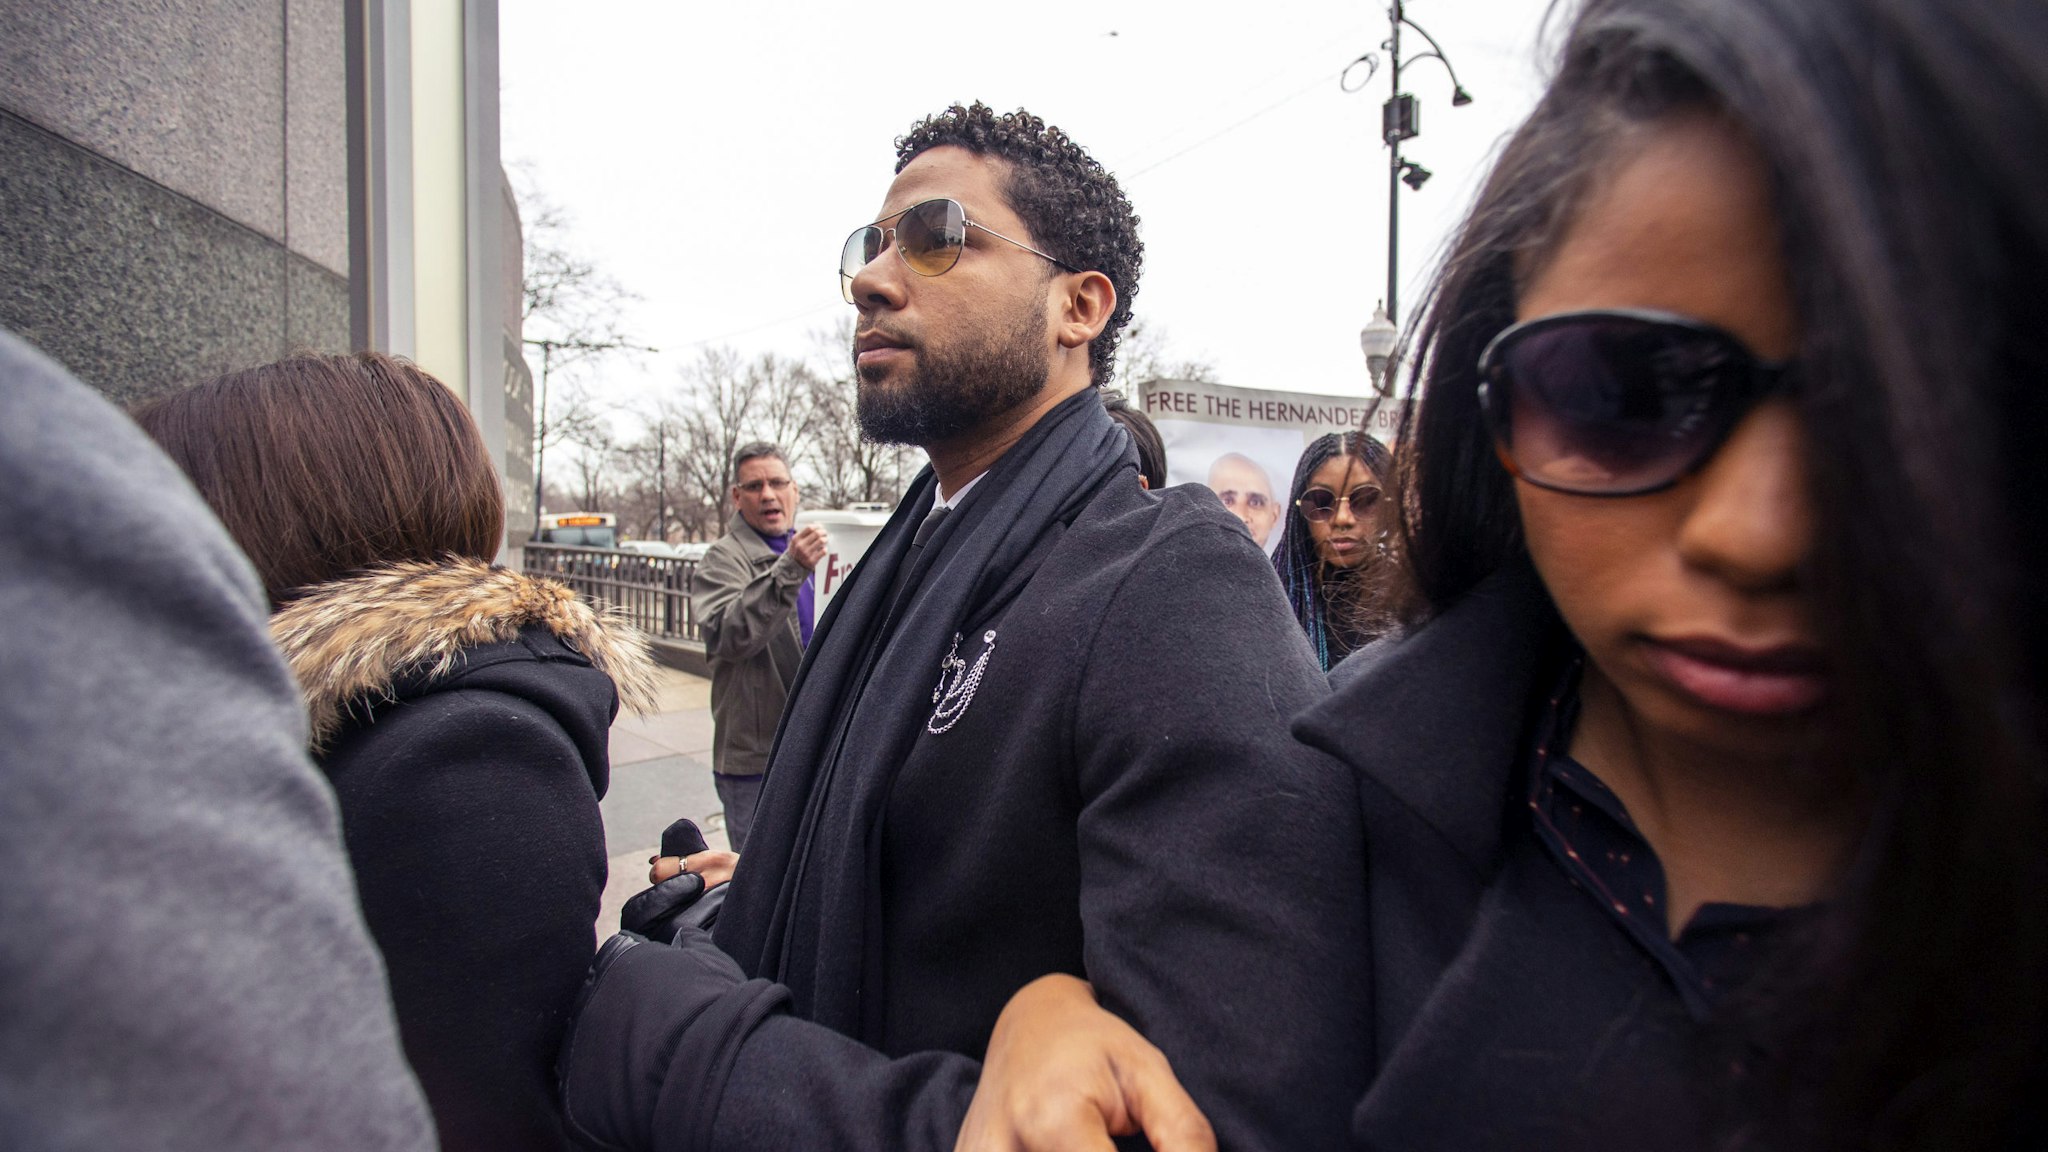 CHICAGO, ILLINOIS - FEBRUARY 24: Actor Jussie Smollett arrives at the Leighton Criminal Courthouse on February 24, 2020 in Chicago, Illinois. Smollett pleaded not guilty to charges of disorderly conduct in a new criminal case connected to allegations he staged a hate crime on himself. (Photo by Nuccio DiNuzzo/Getty Images)